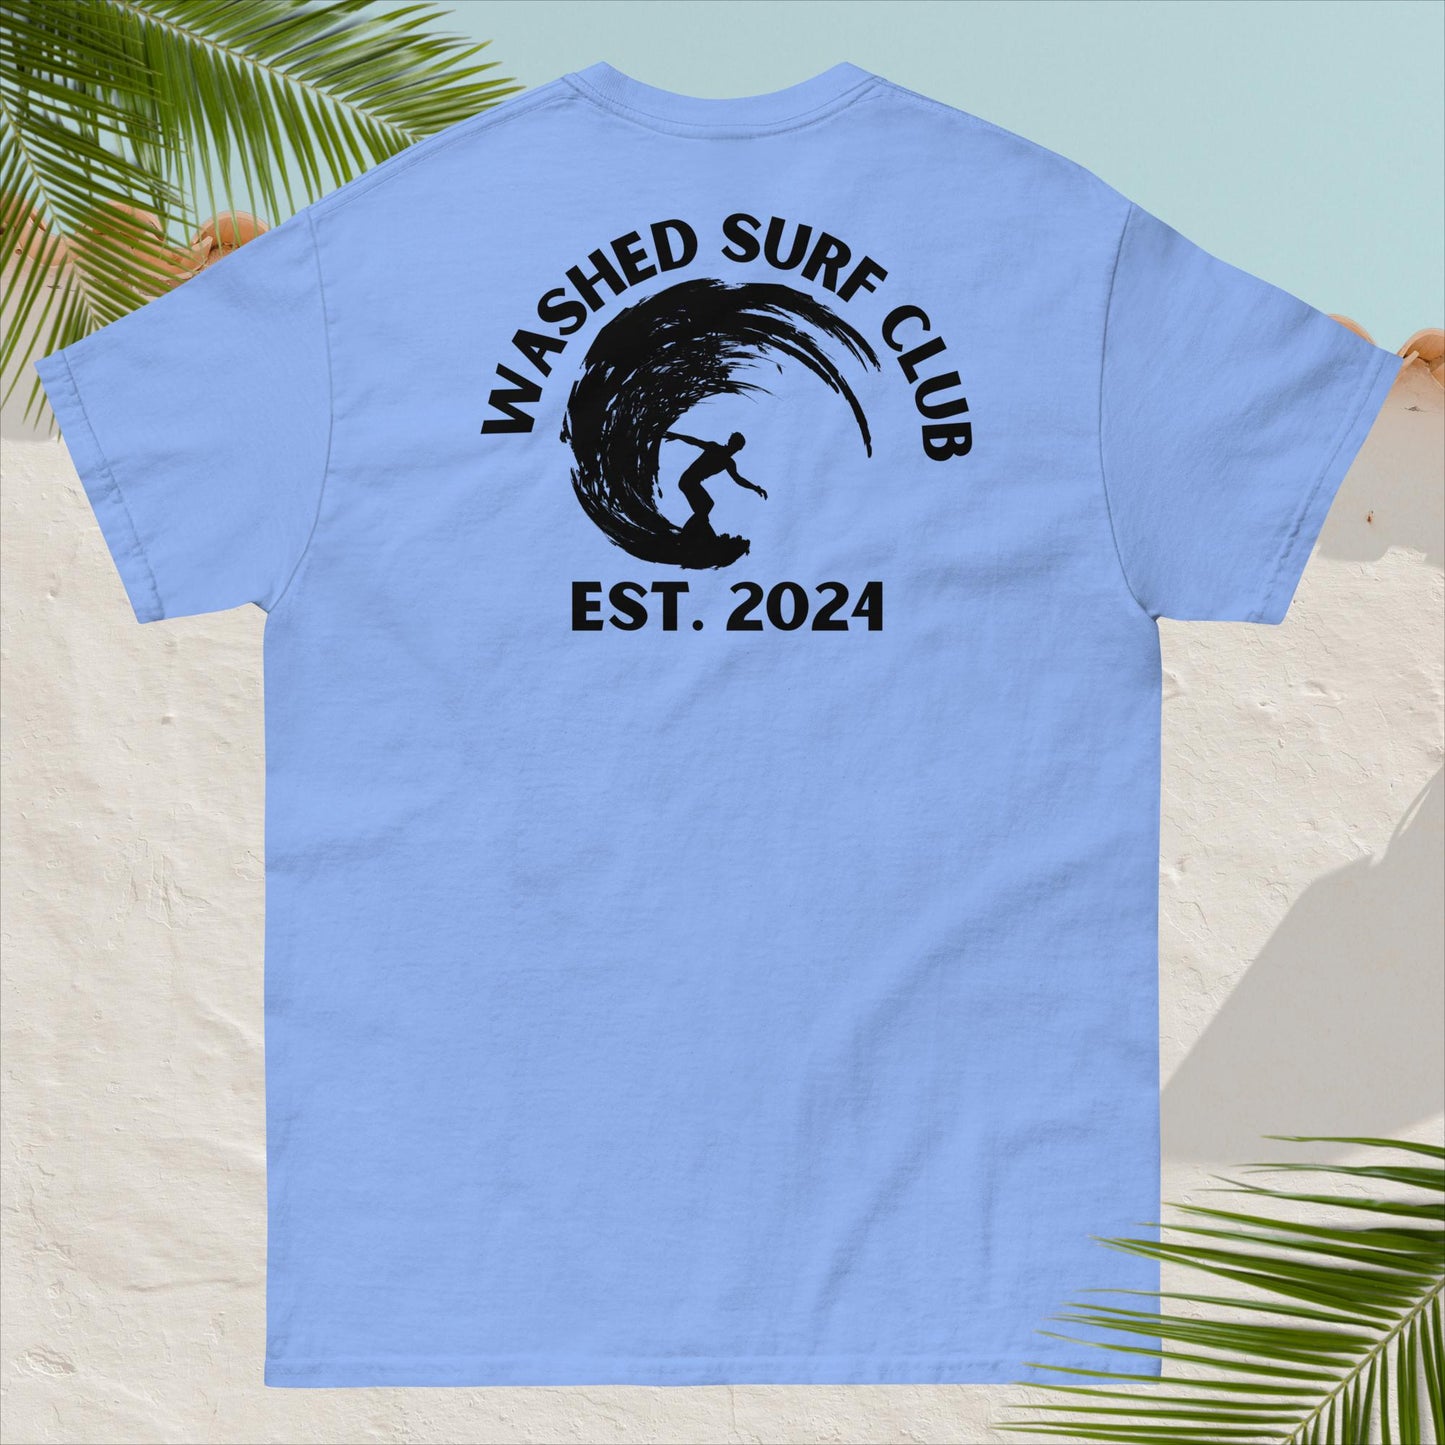 Washed Surf Club Surfer Tee